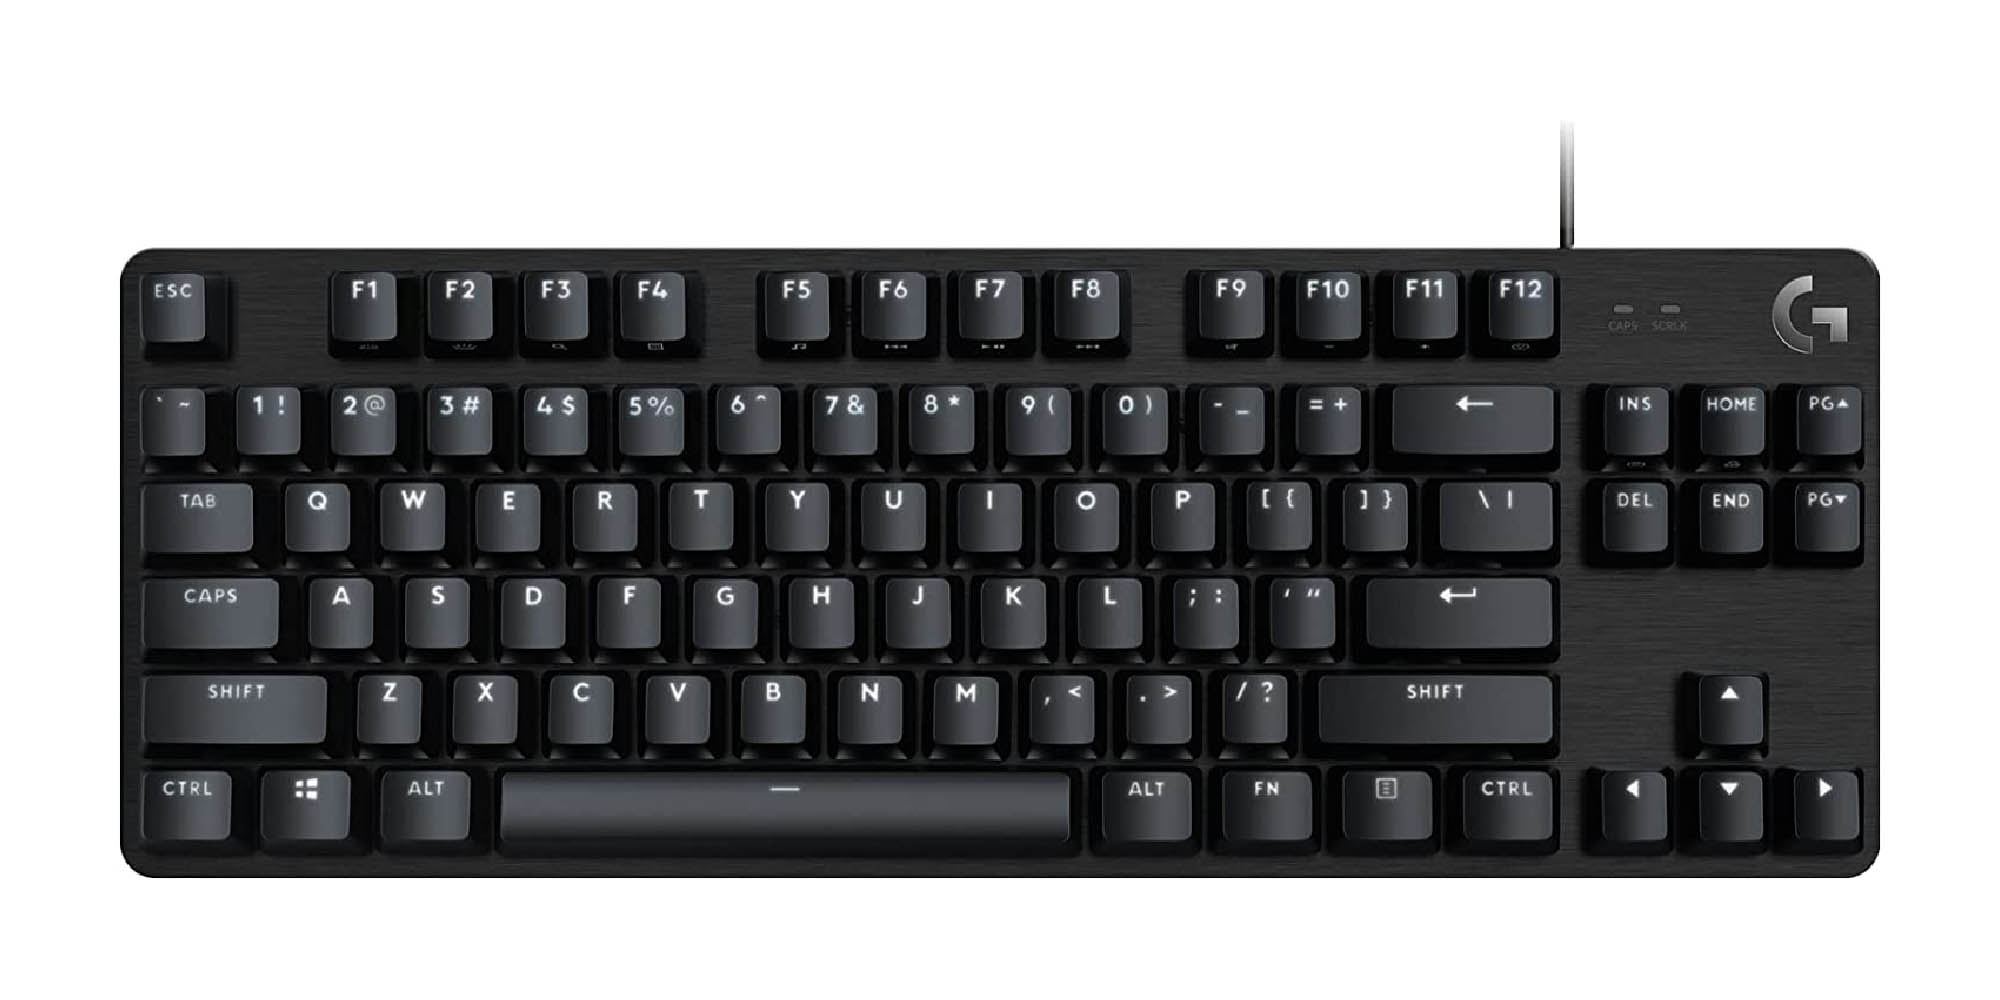 Logitech's G413 SE Mechanical Gaming Keyboard falls 29% to new low of (Save $20)